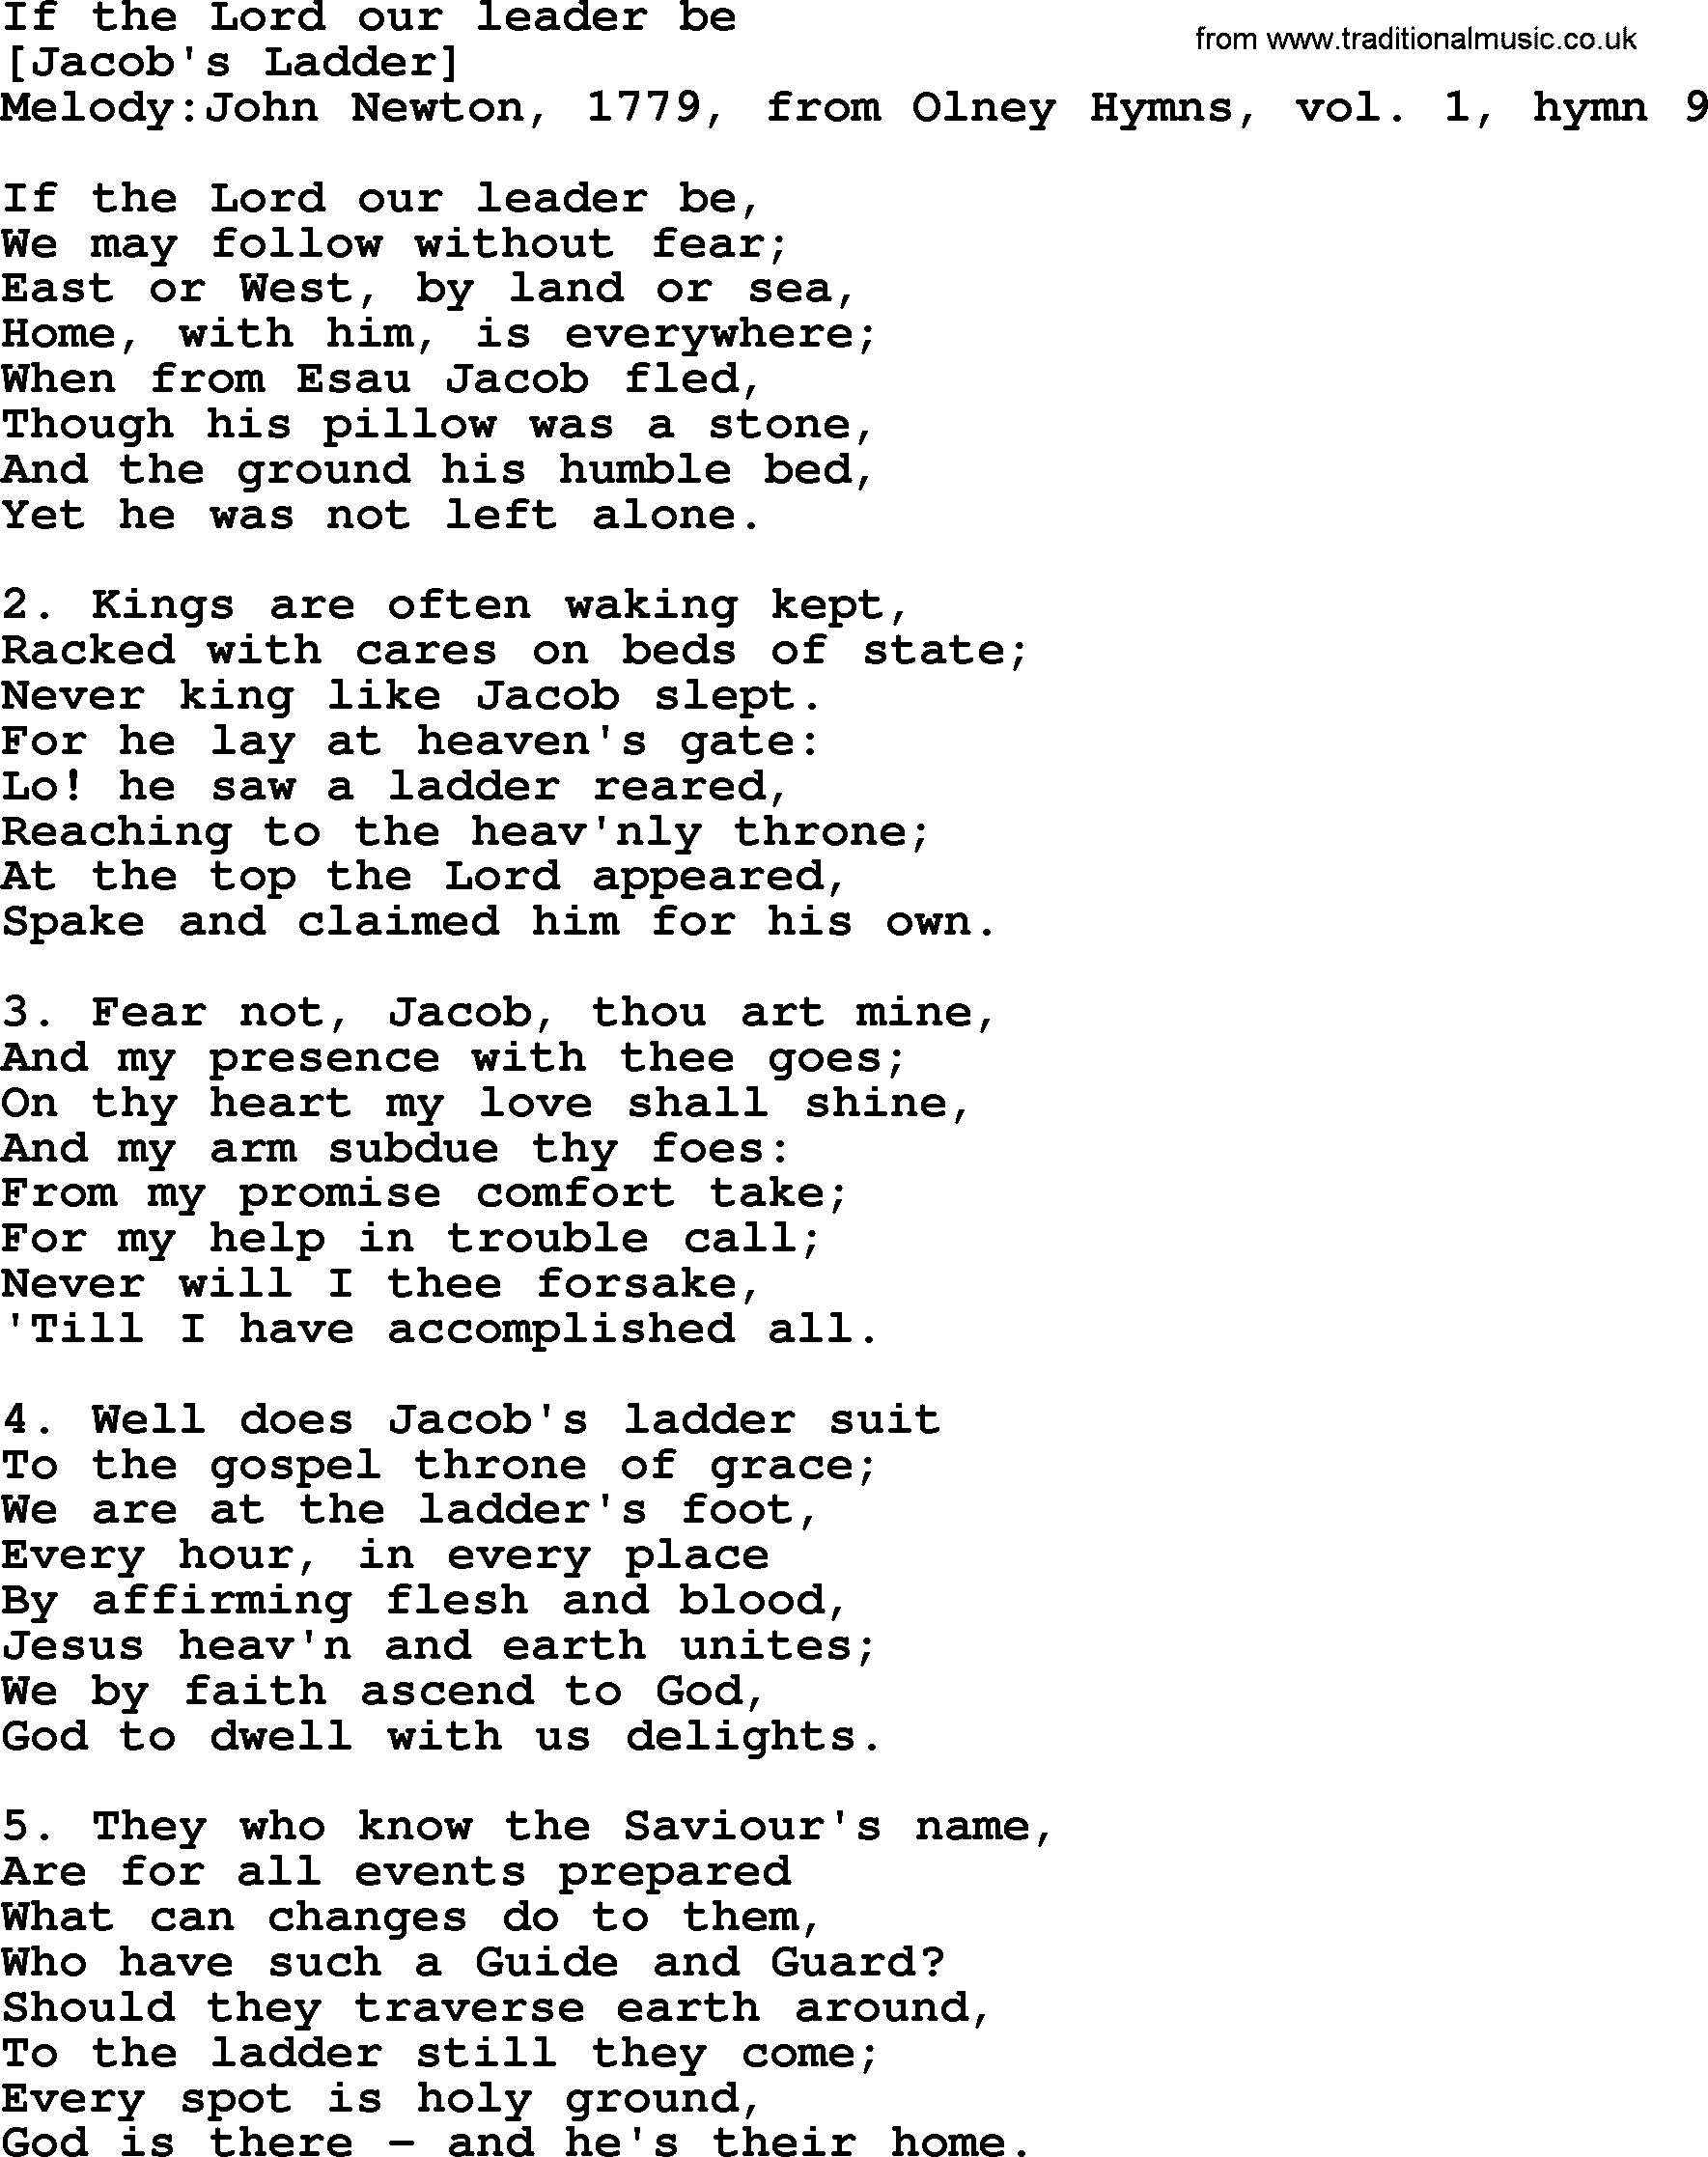 Old English Song: If The Lord Our Leader Be lyrics